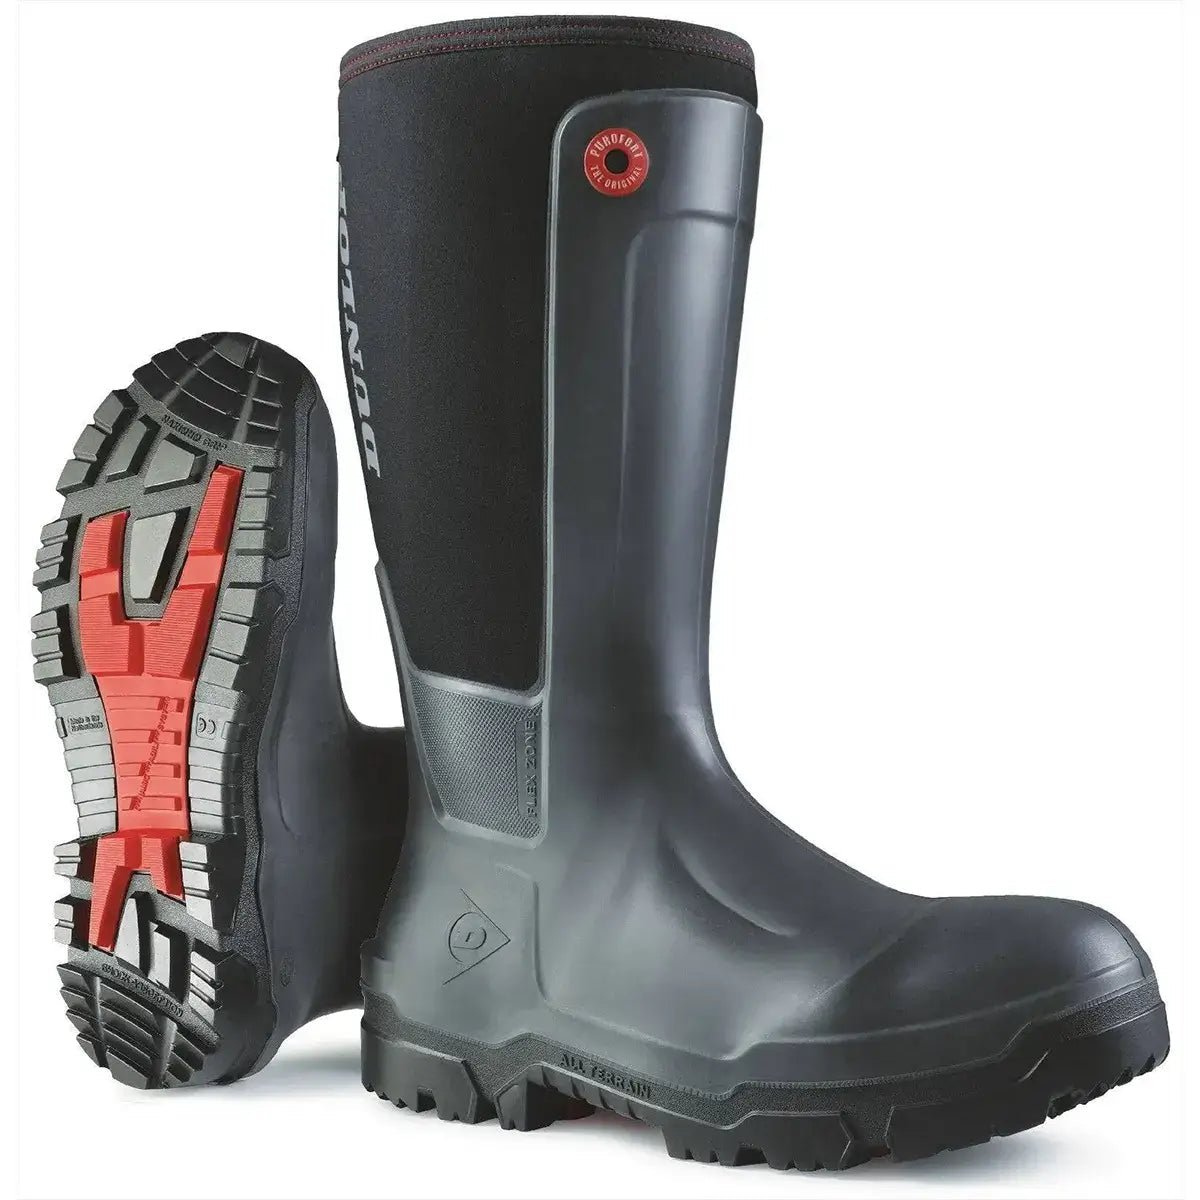 Dunlop Snugboot Workpro Full Safety Wellington Boots - Shoe Store Direct